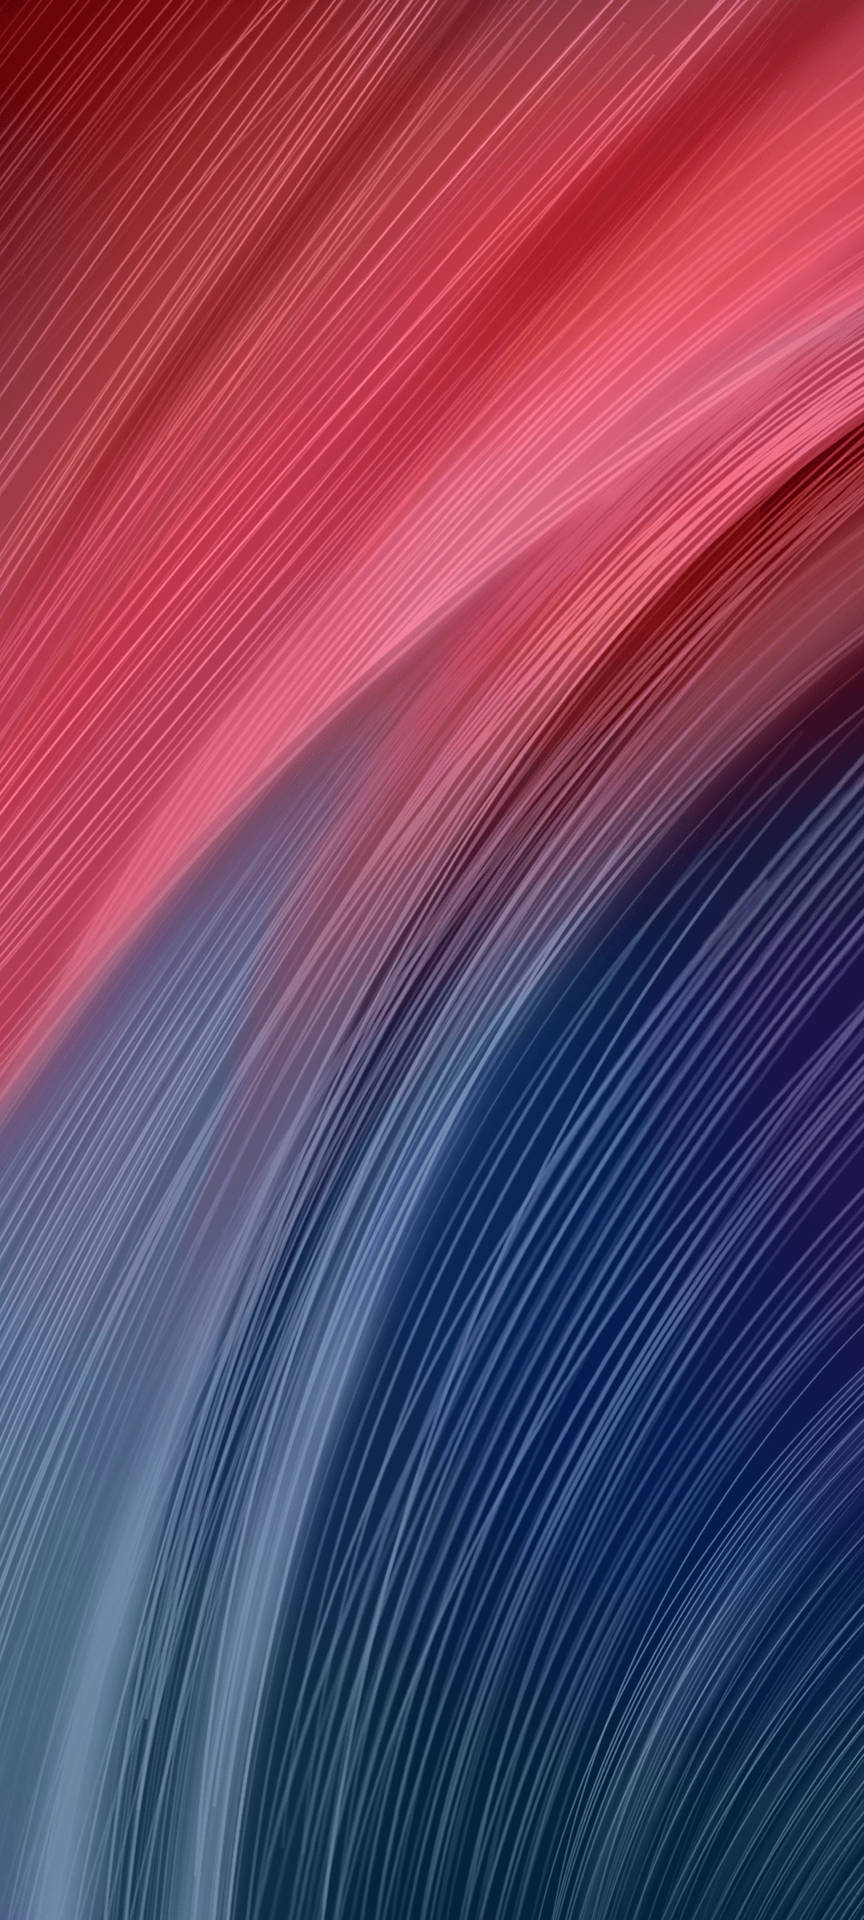 Redmi 9 Pink And Blue Curve Lines Wallpaper